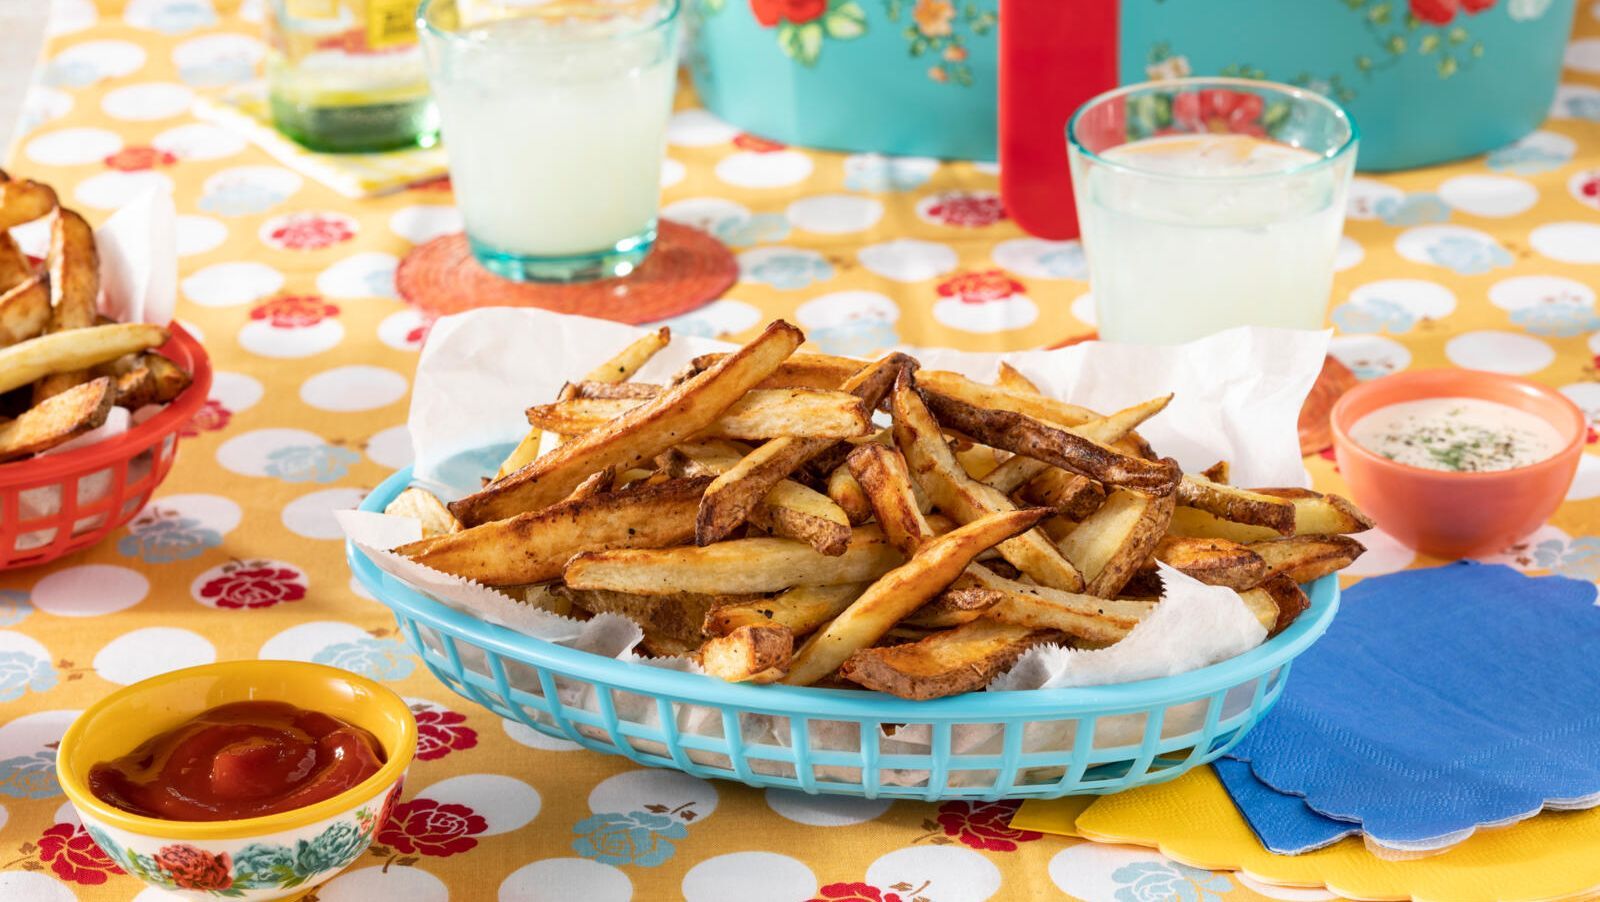 https://hips.hearstapps.com/vidthumb/images/air-fryer-french-fries-recipe-1643838697-64a5900ed2680.jpeg?crop=1.00xw:1.00xh;0,0